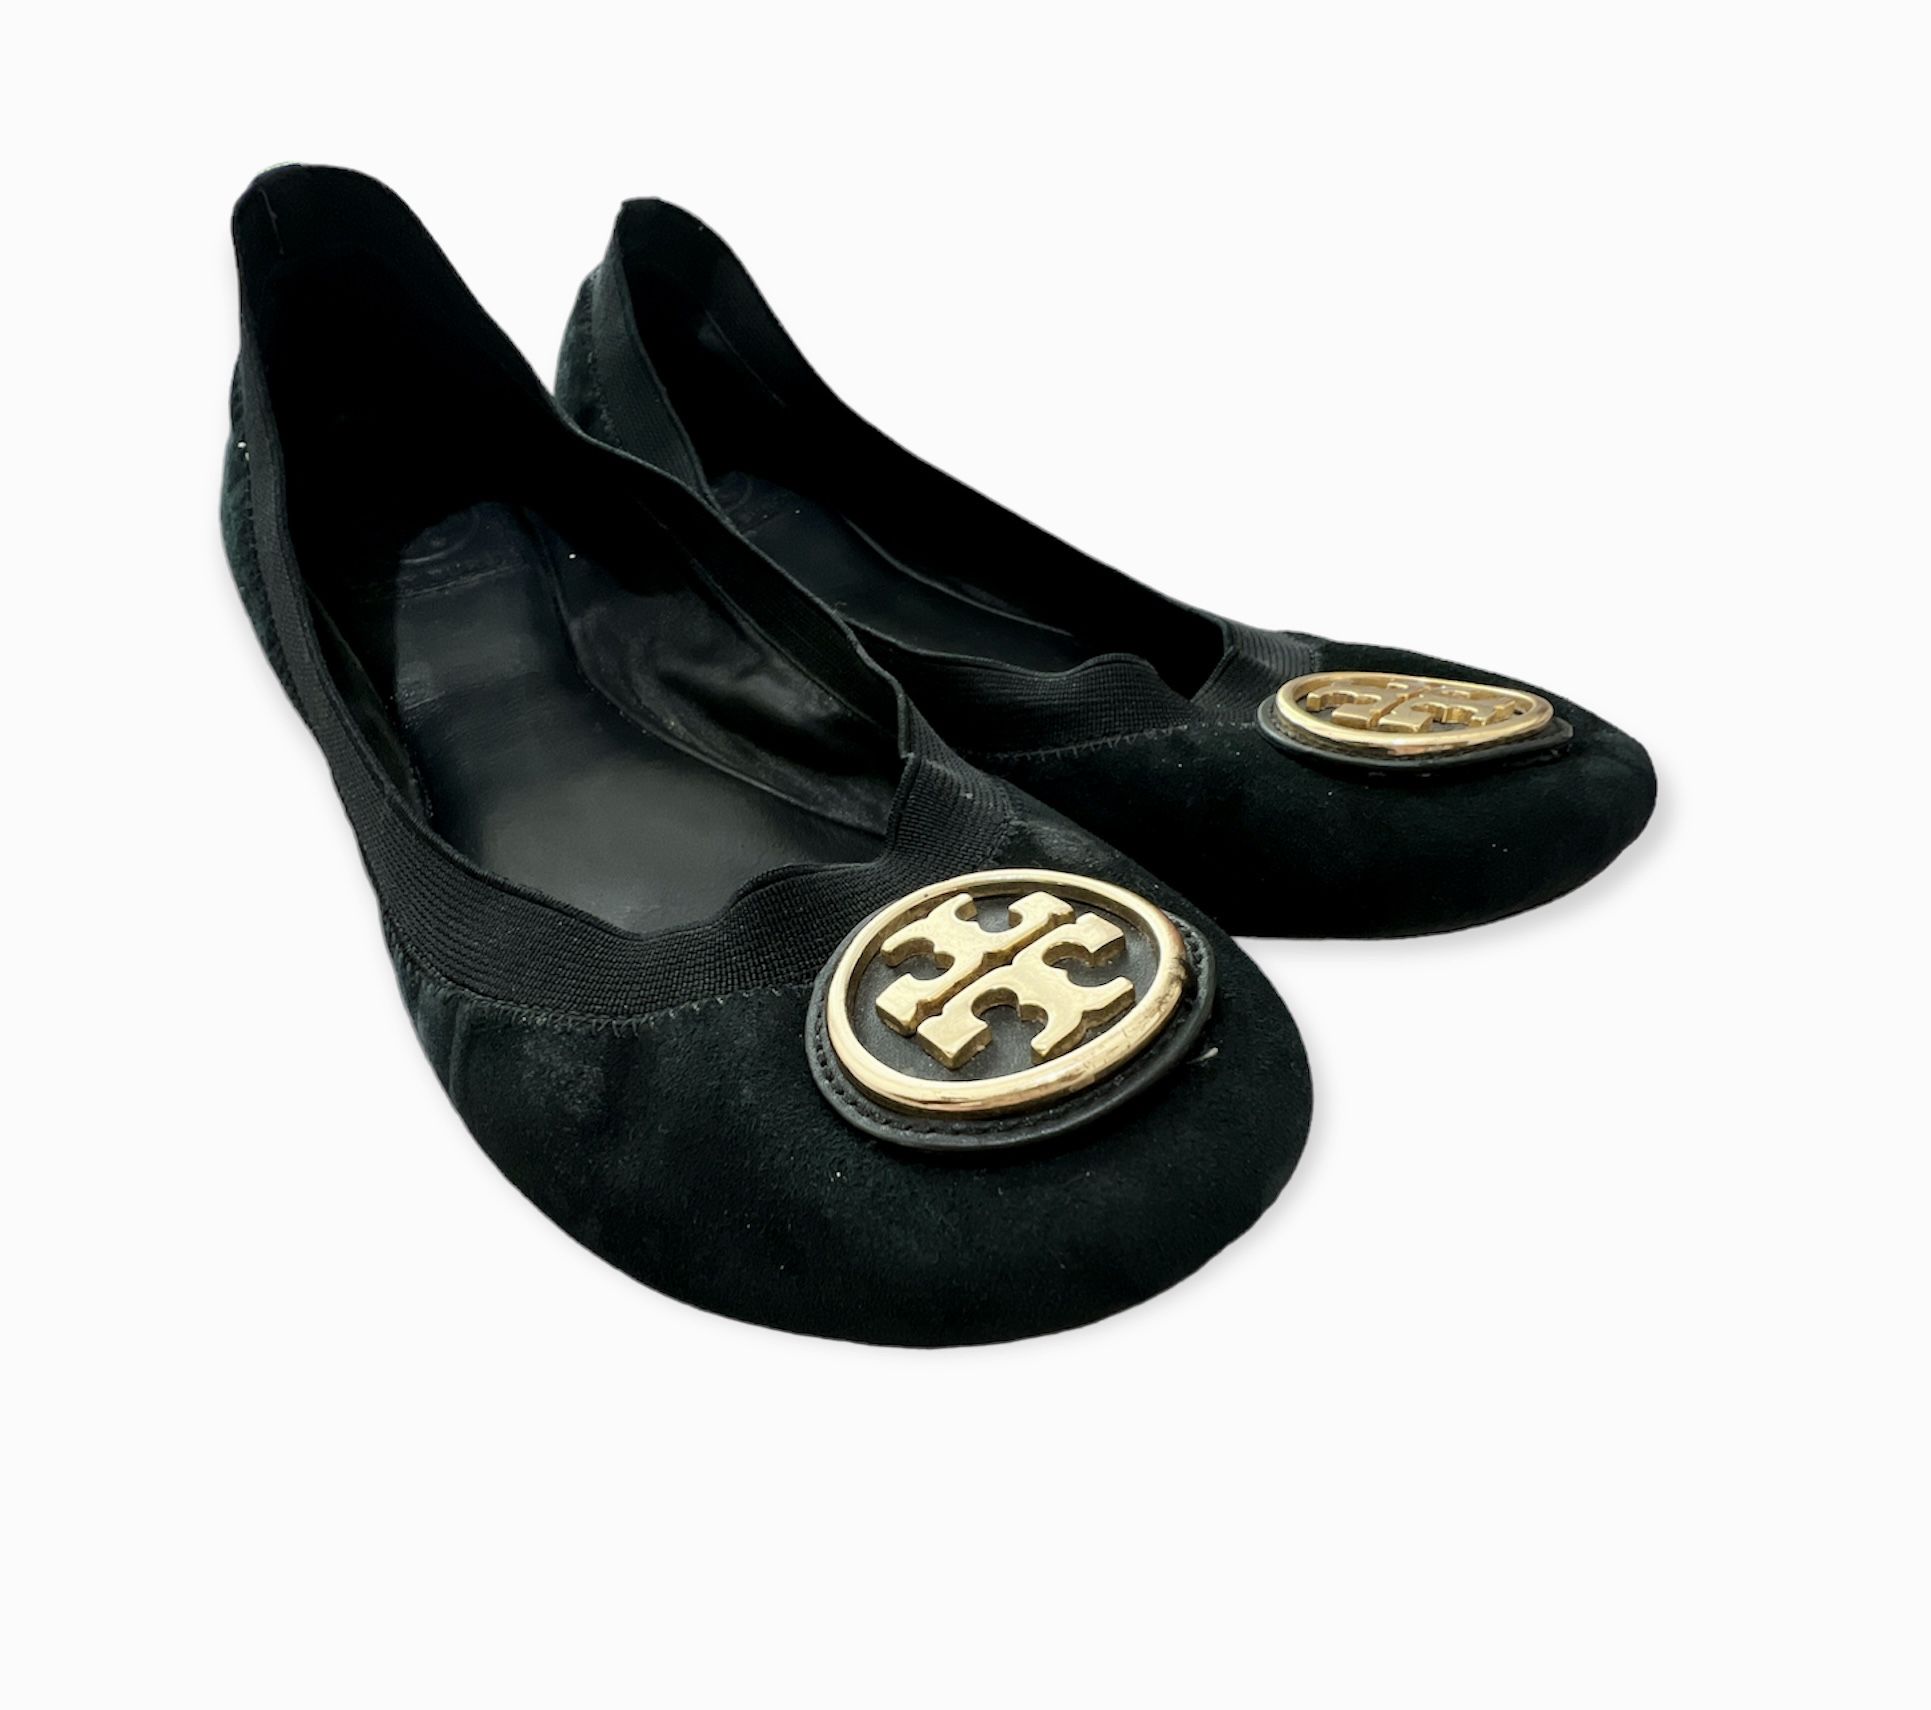 Tory Burch Suede Ballet Flats for Sale in El Paso, TX - OfferUp